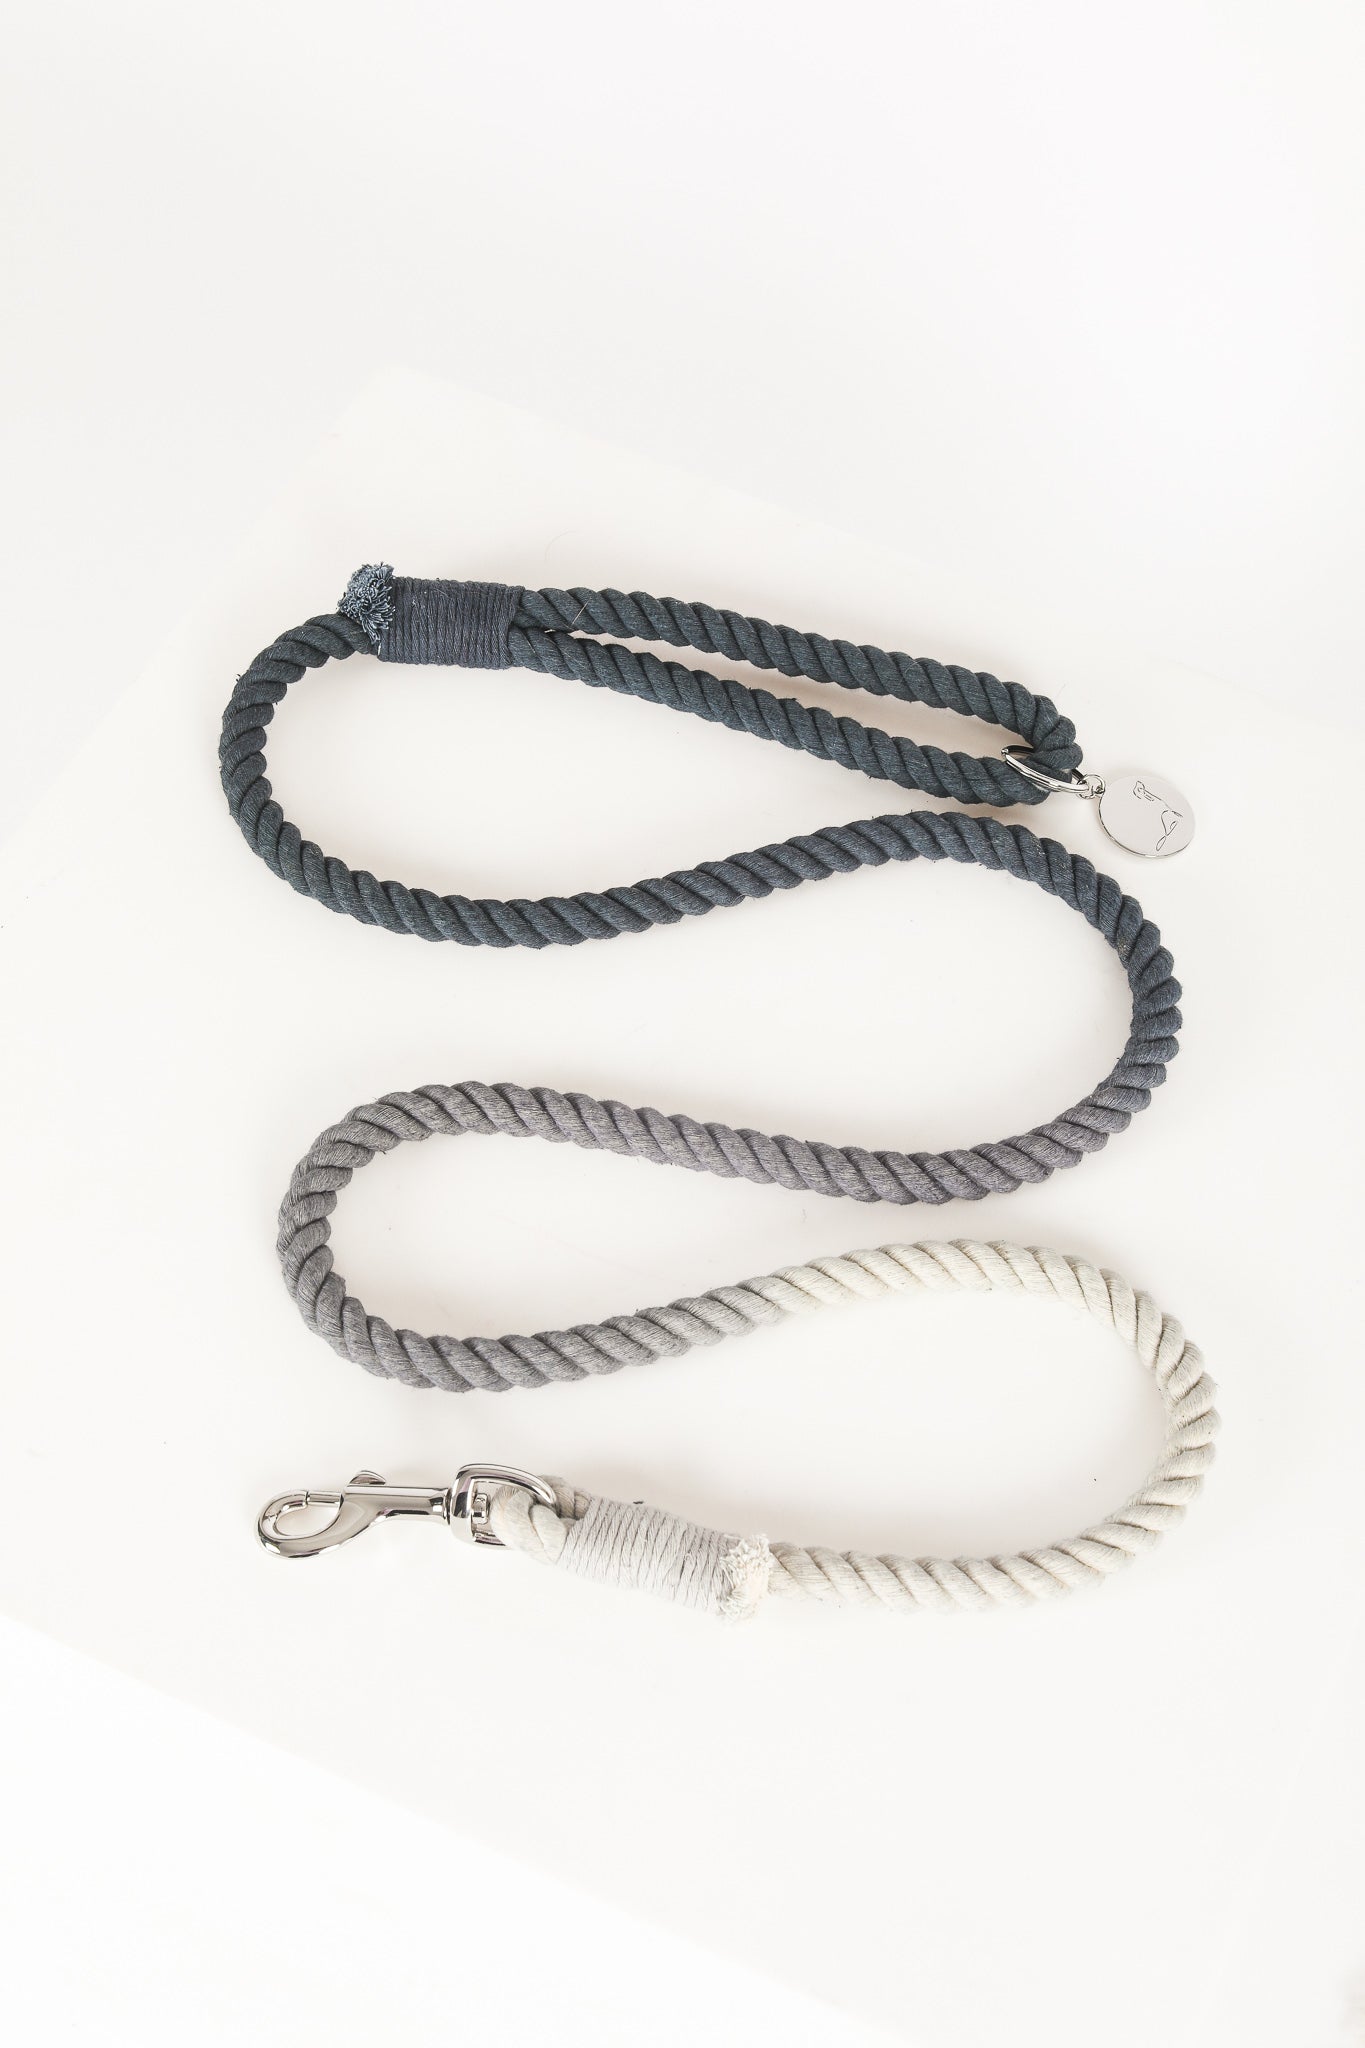 ROPE LEASH - Whistler Grey Ombré